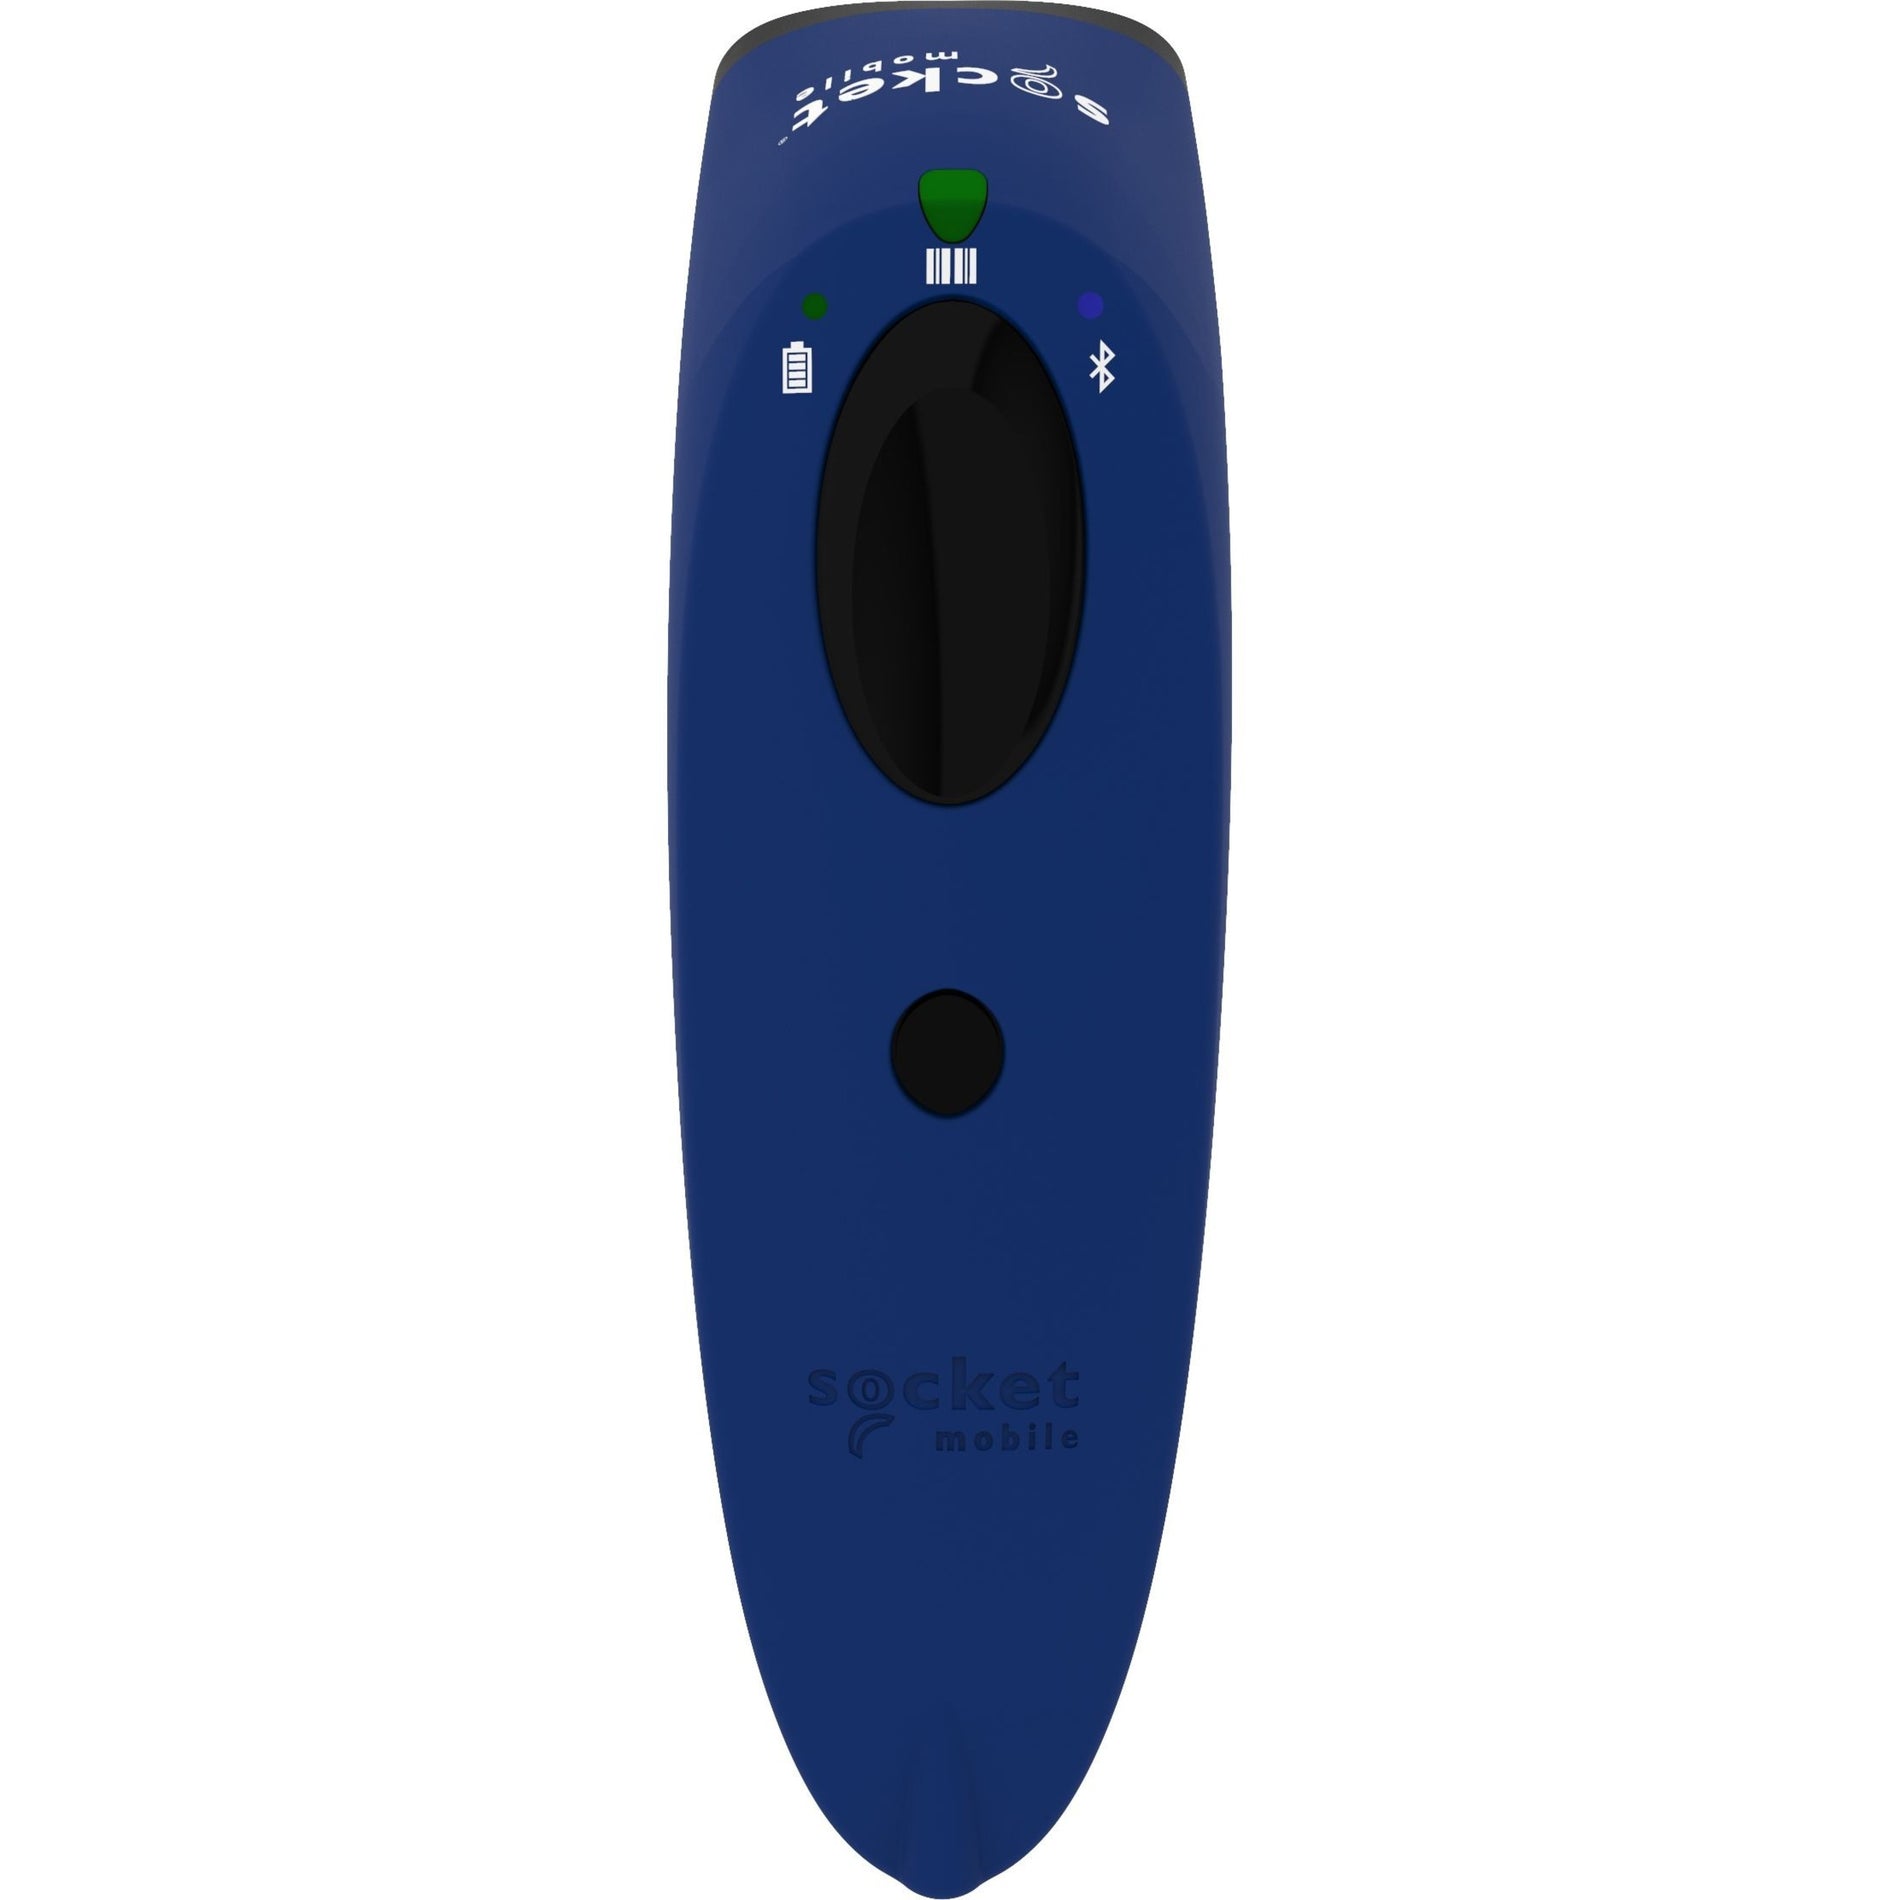 Socket Mobile CX3974-3031 SocketScan S720, Blue - Wireless Barcode Scanner for Transportation, Asset Tracking, Hospitality, and More